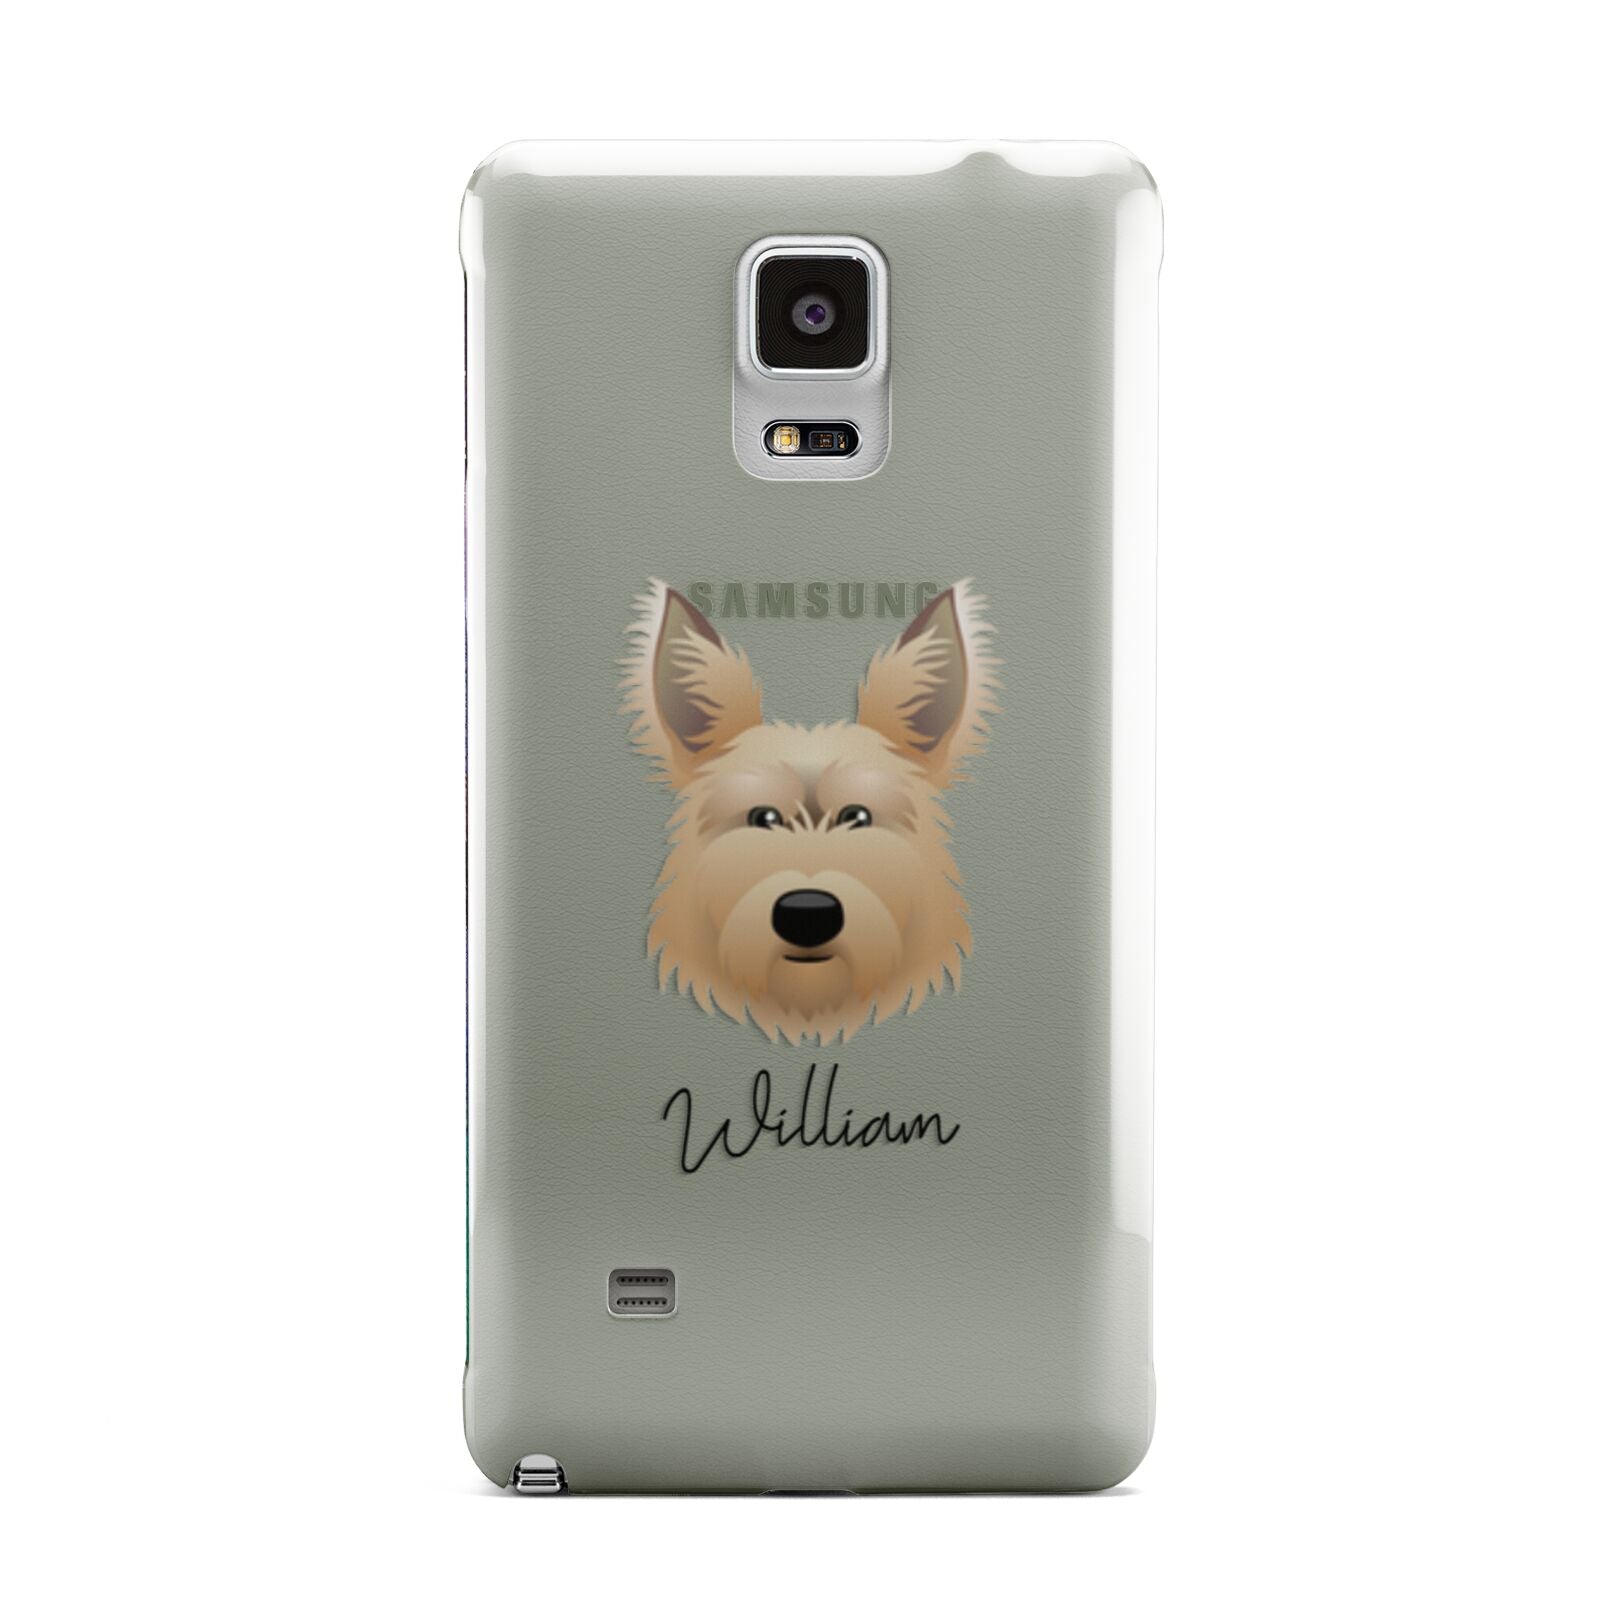 Picardy Sheepdog Personalised Samsung Galaxy Note 4 Case